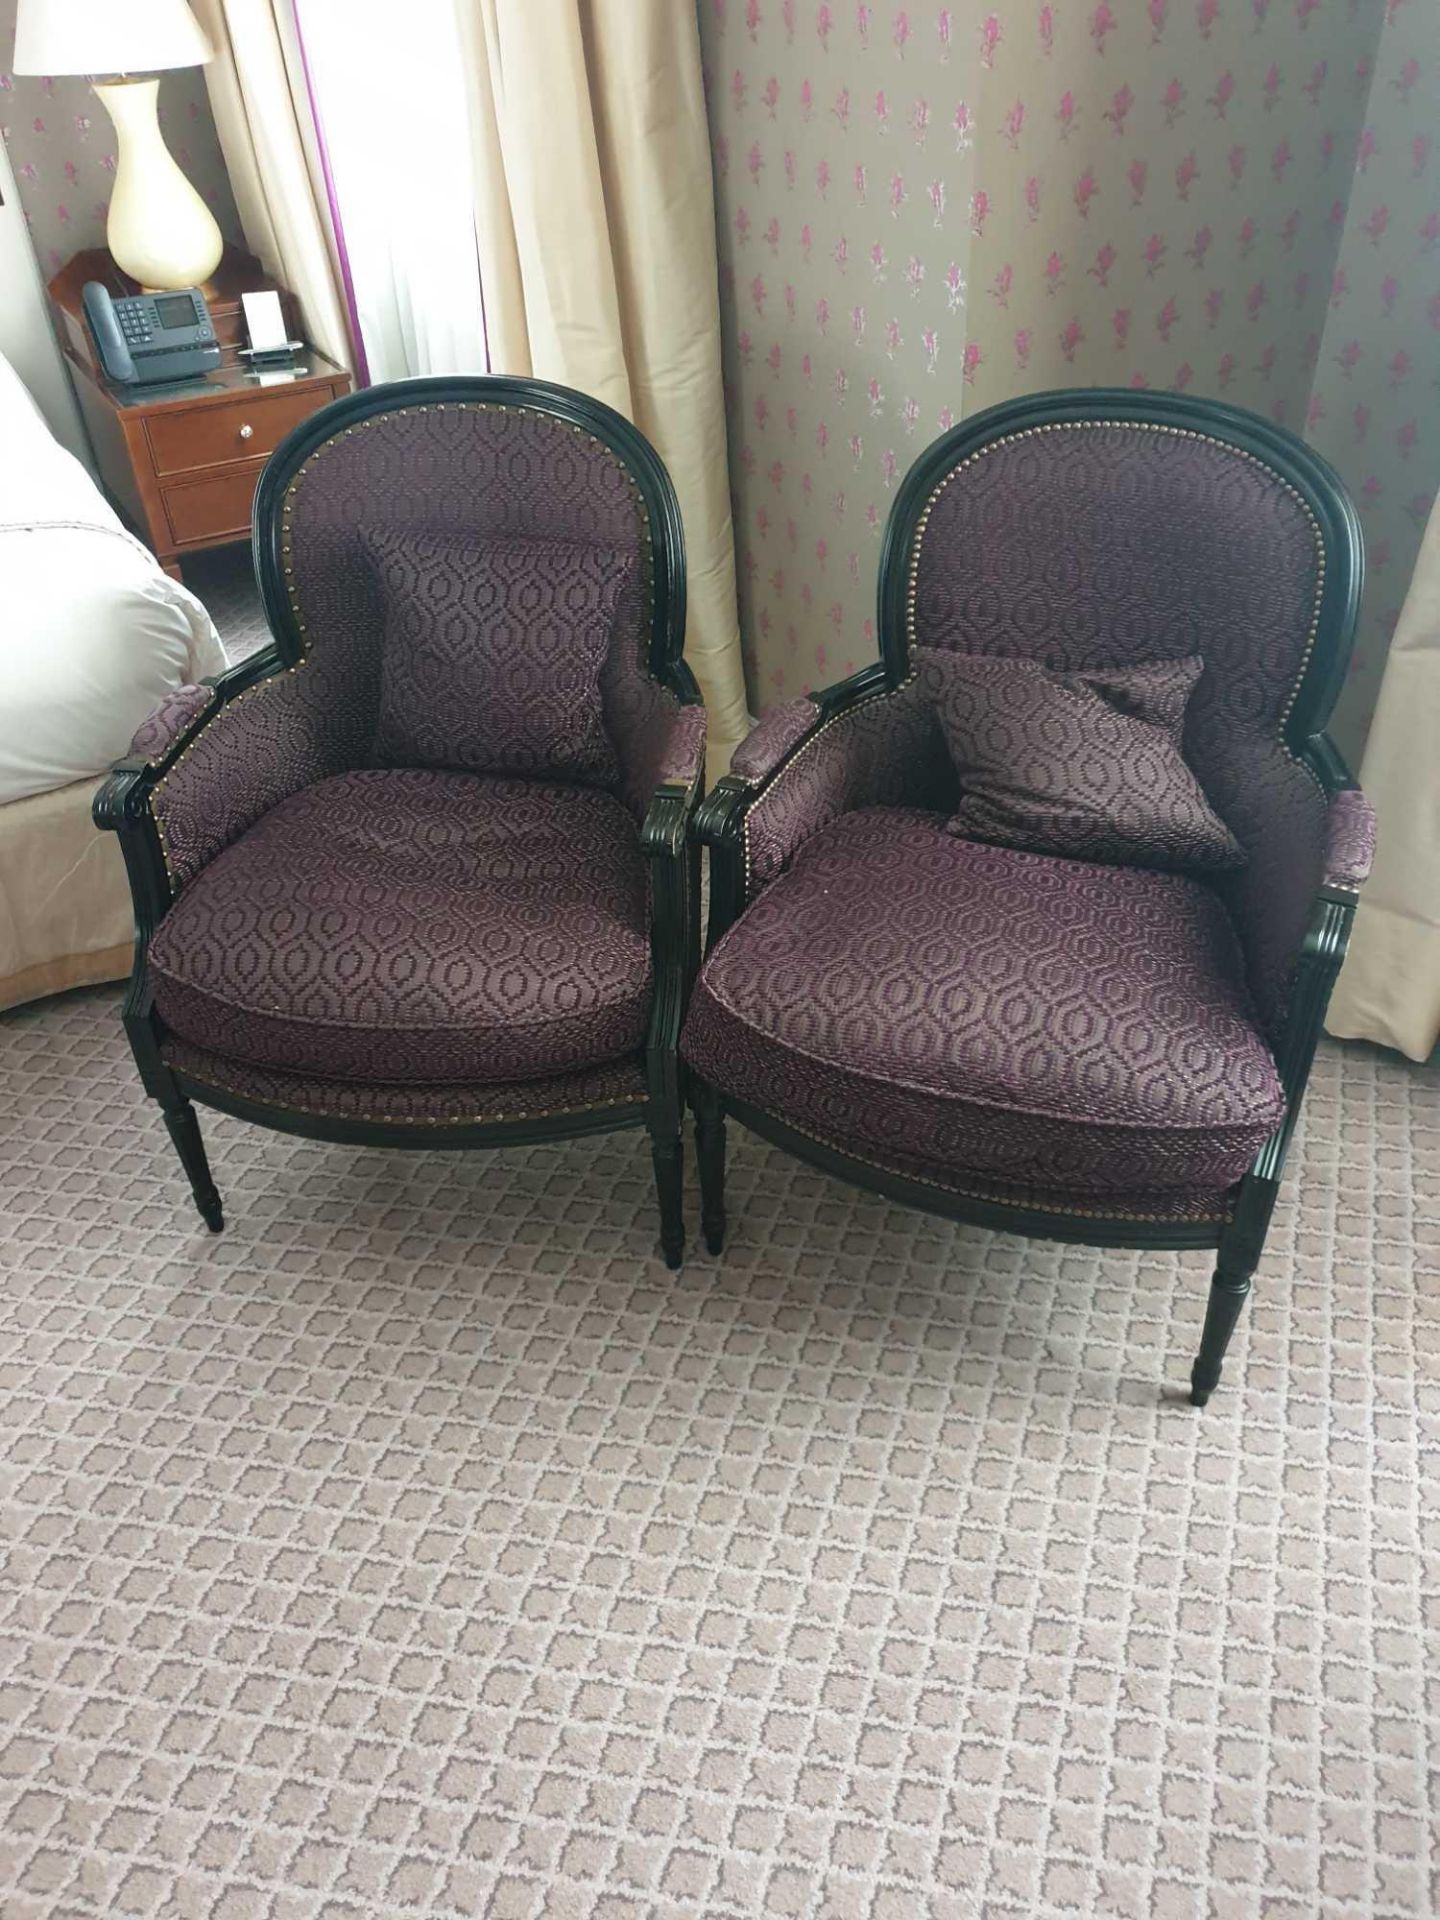 A pair of Ã‚ Bergere Chair Black Wood Frame Upholstered In A Dark Mauve Pattern With Stud Pin Detail